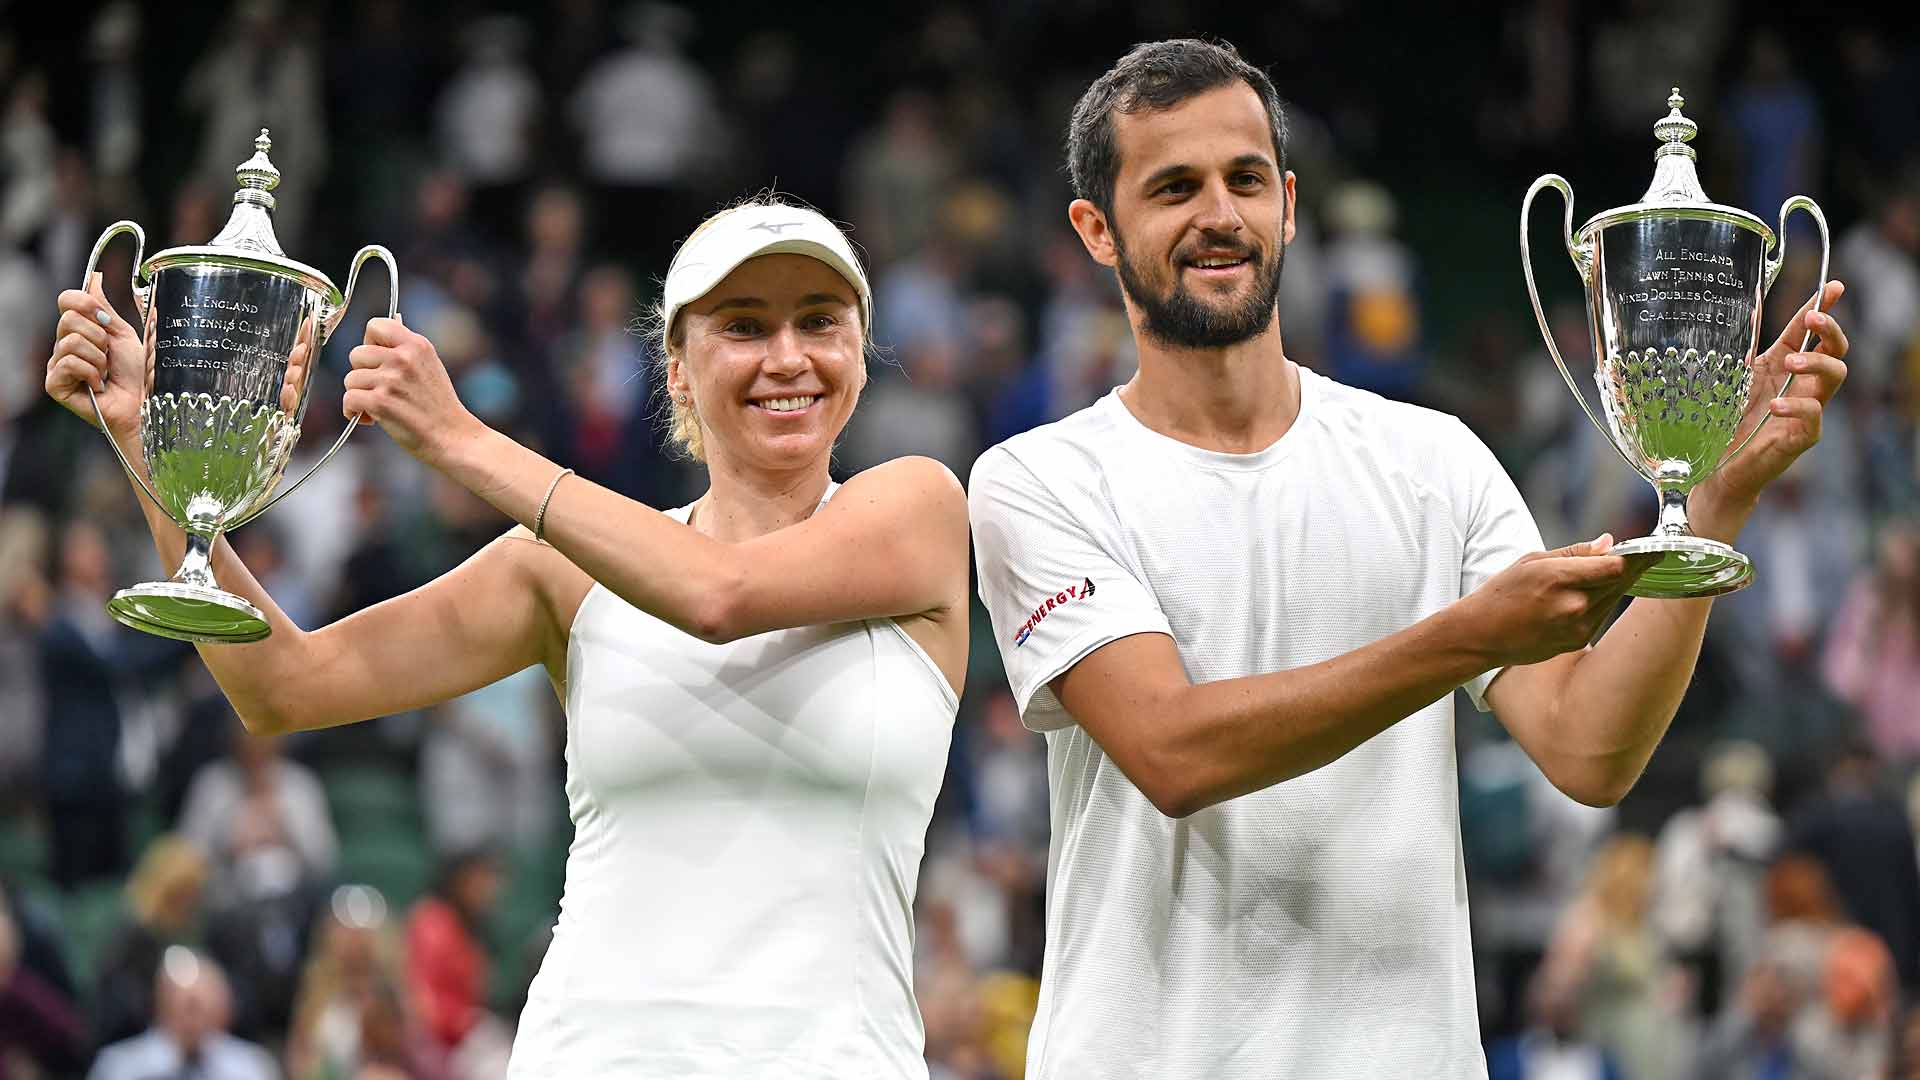 Lyudmyla Kichenok and Mate Pavic win a high-quality championship match to lift the 2023 mixed doubles crown on Thursday at Wimbledon.